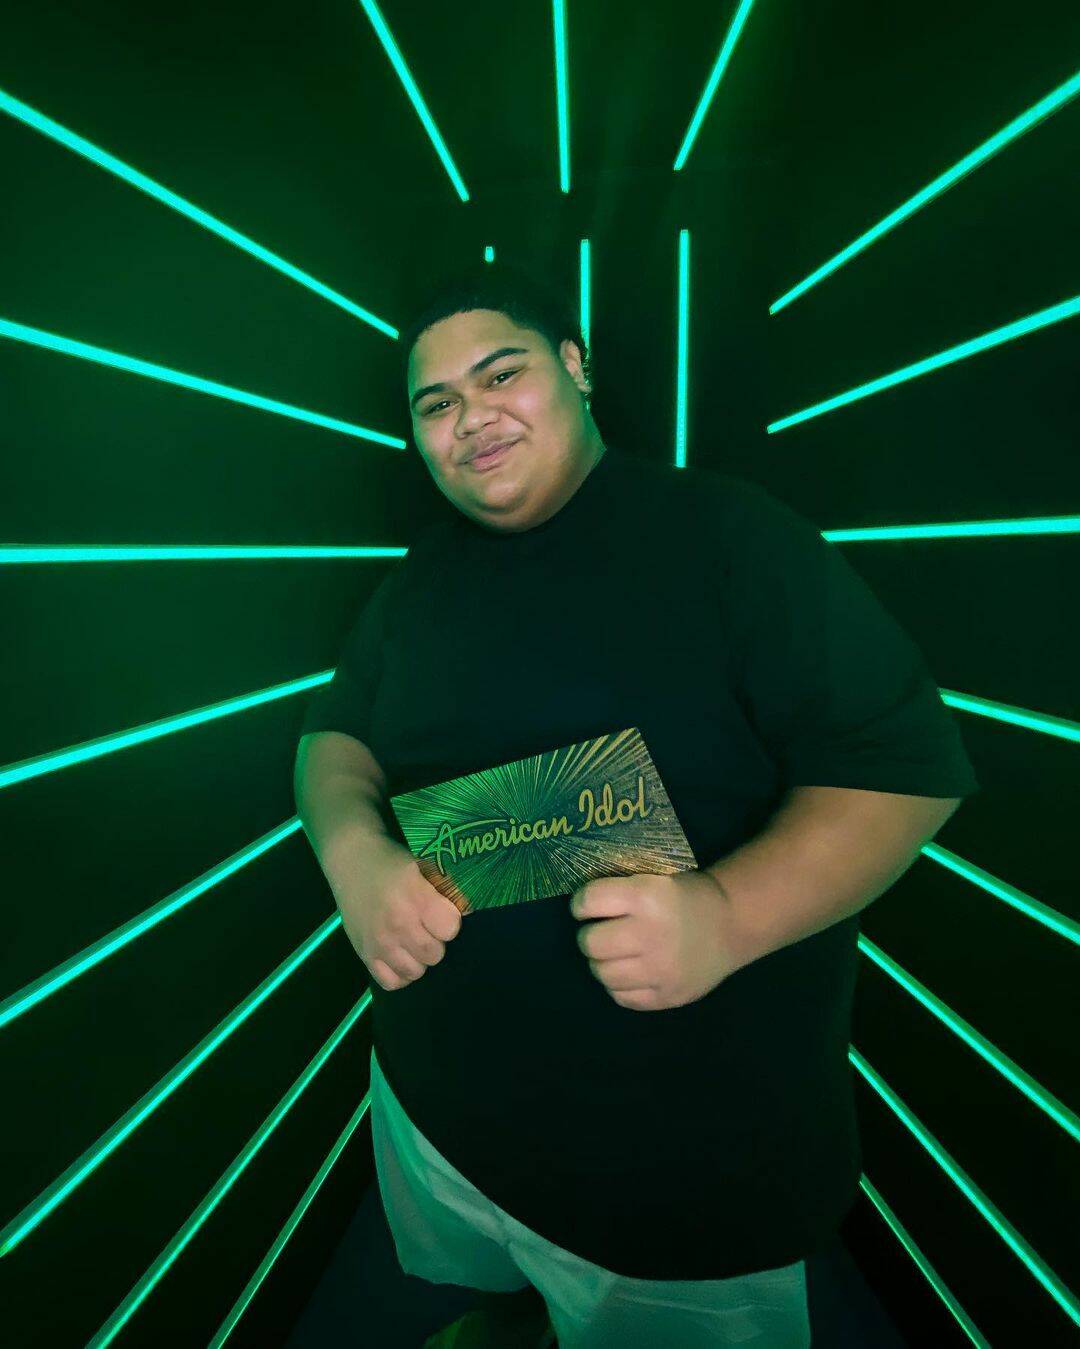 Photo courtesy of Iam Tongi’s Facebook page
Iam Tongi shows off his “Golden Ticket” after auditioning and making it to the next round of competition on “American Idol.”